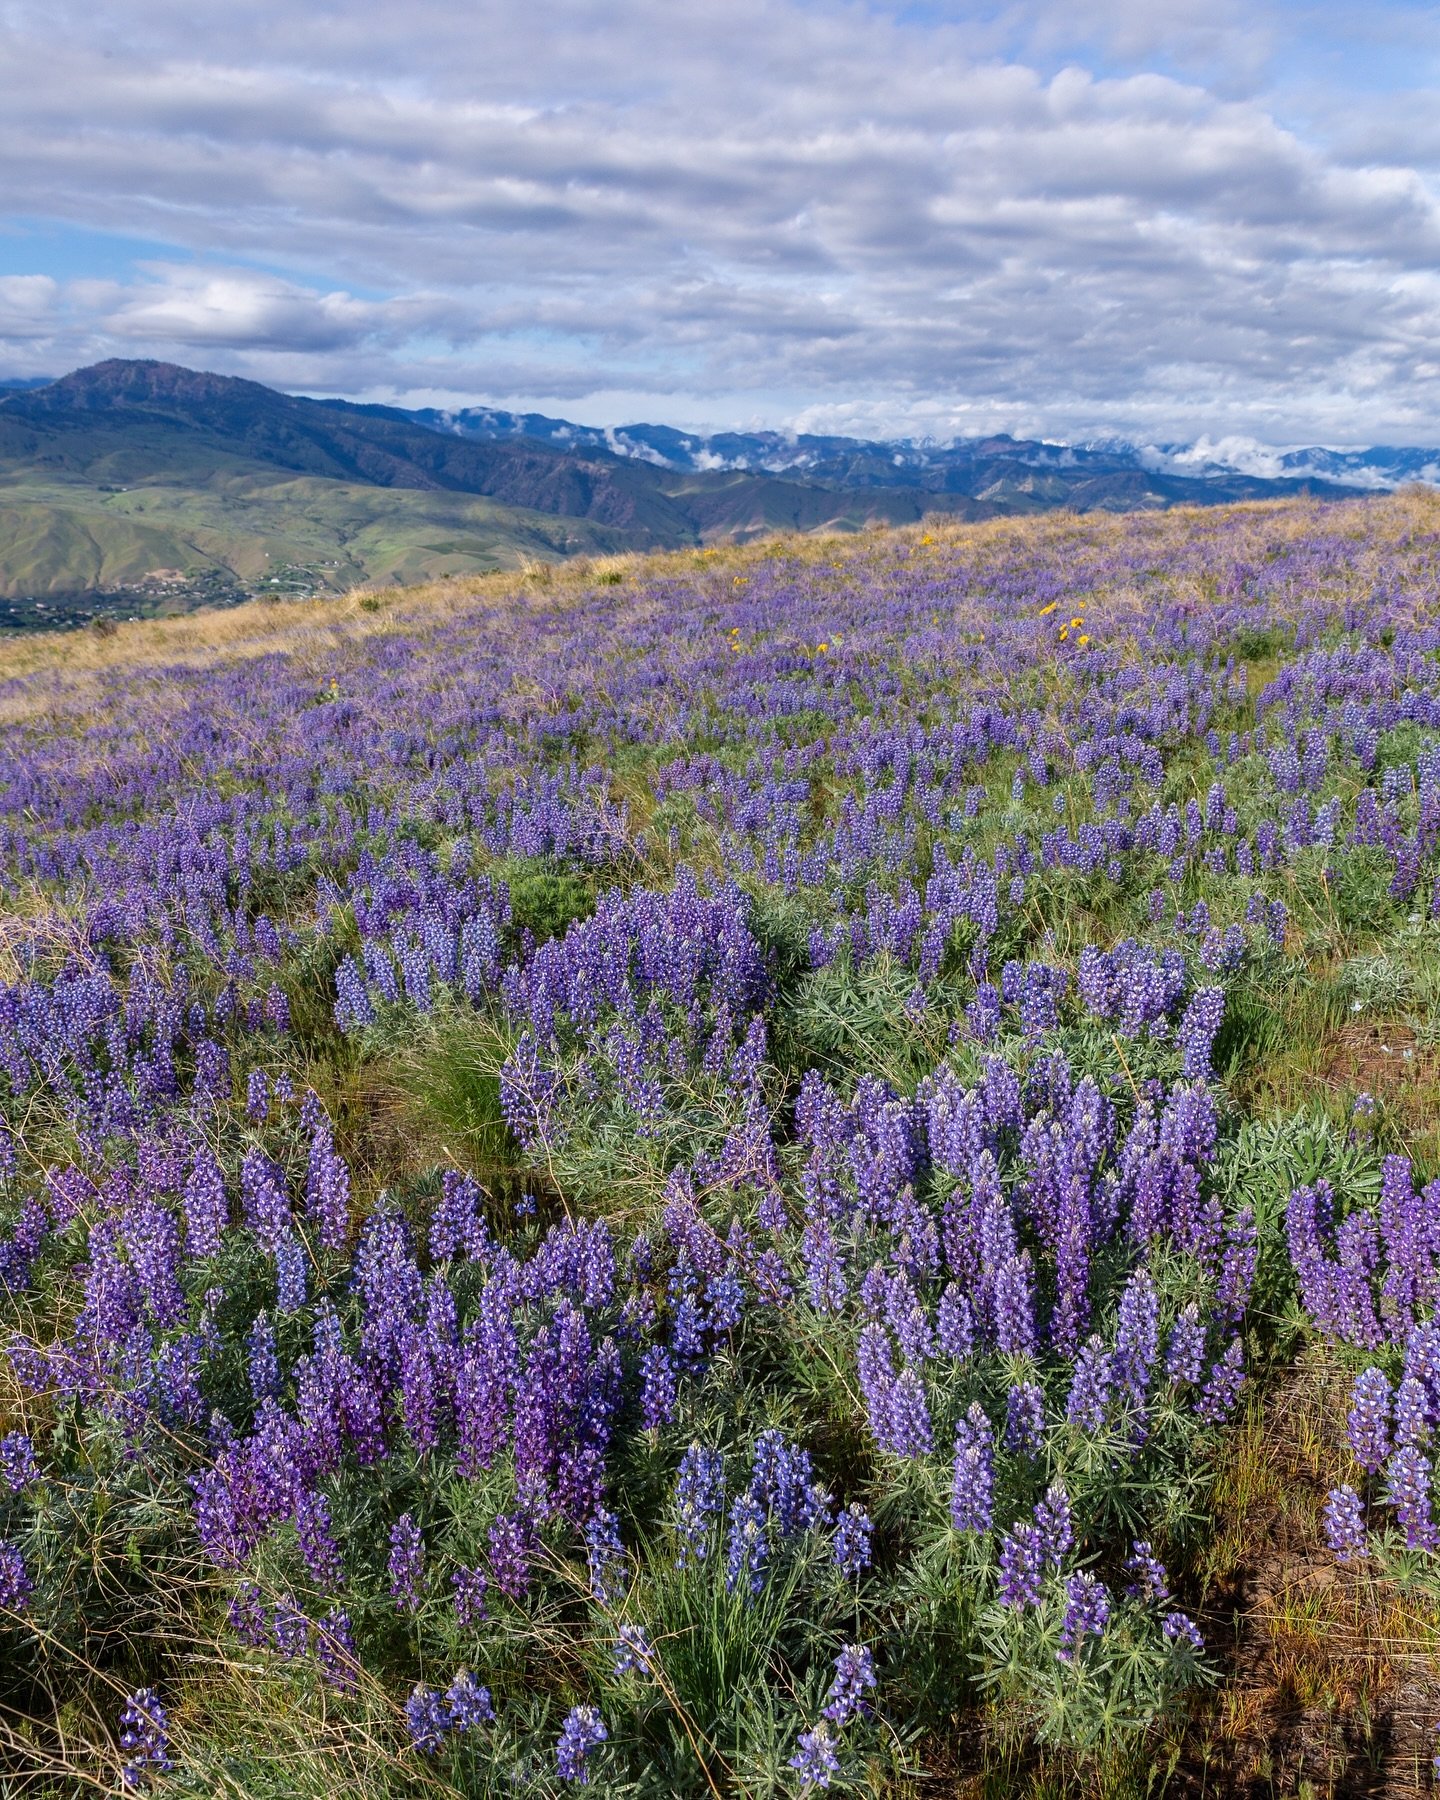 Day 2062: It&rsquo;s not quite the endless fields of lupine you find in some places (like Iceland or New Zealand), but somehow we&rsquo;ve once again come around to the start of bluish-purple flower season in the Cascades. Even though this photo is f